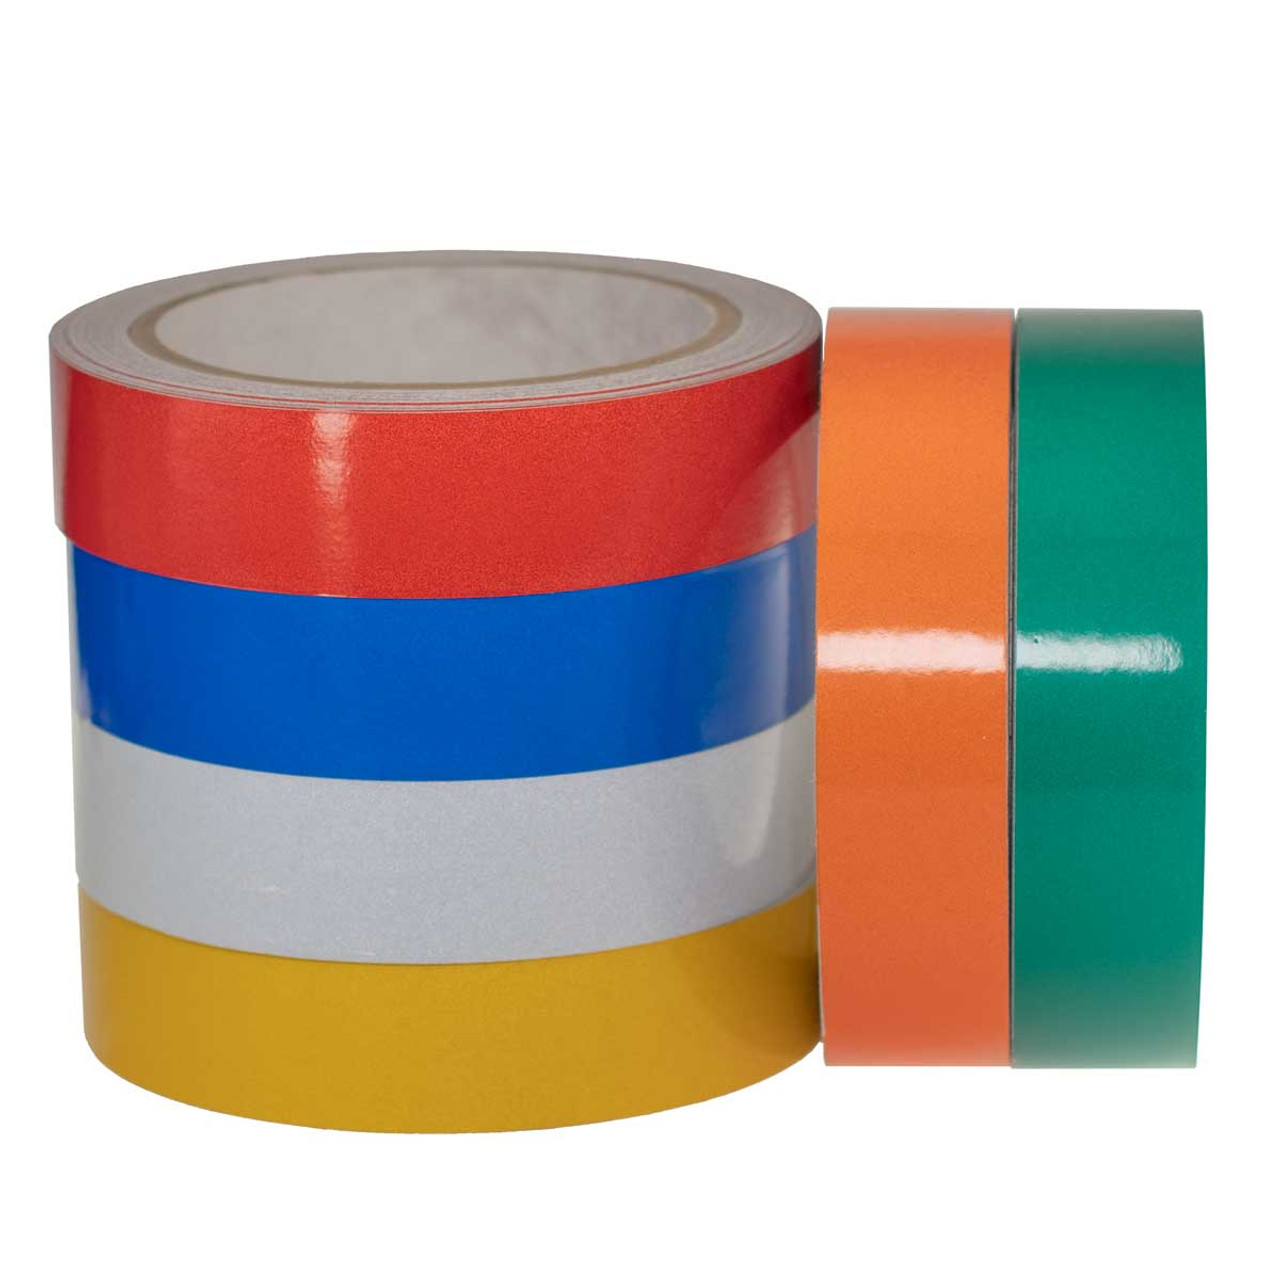 NEON ORANGE  Reflective   Conspicuity  Tape 1" x 50 feet   Thick 